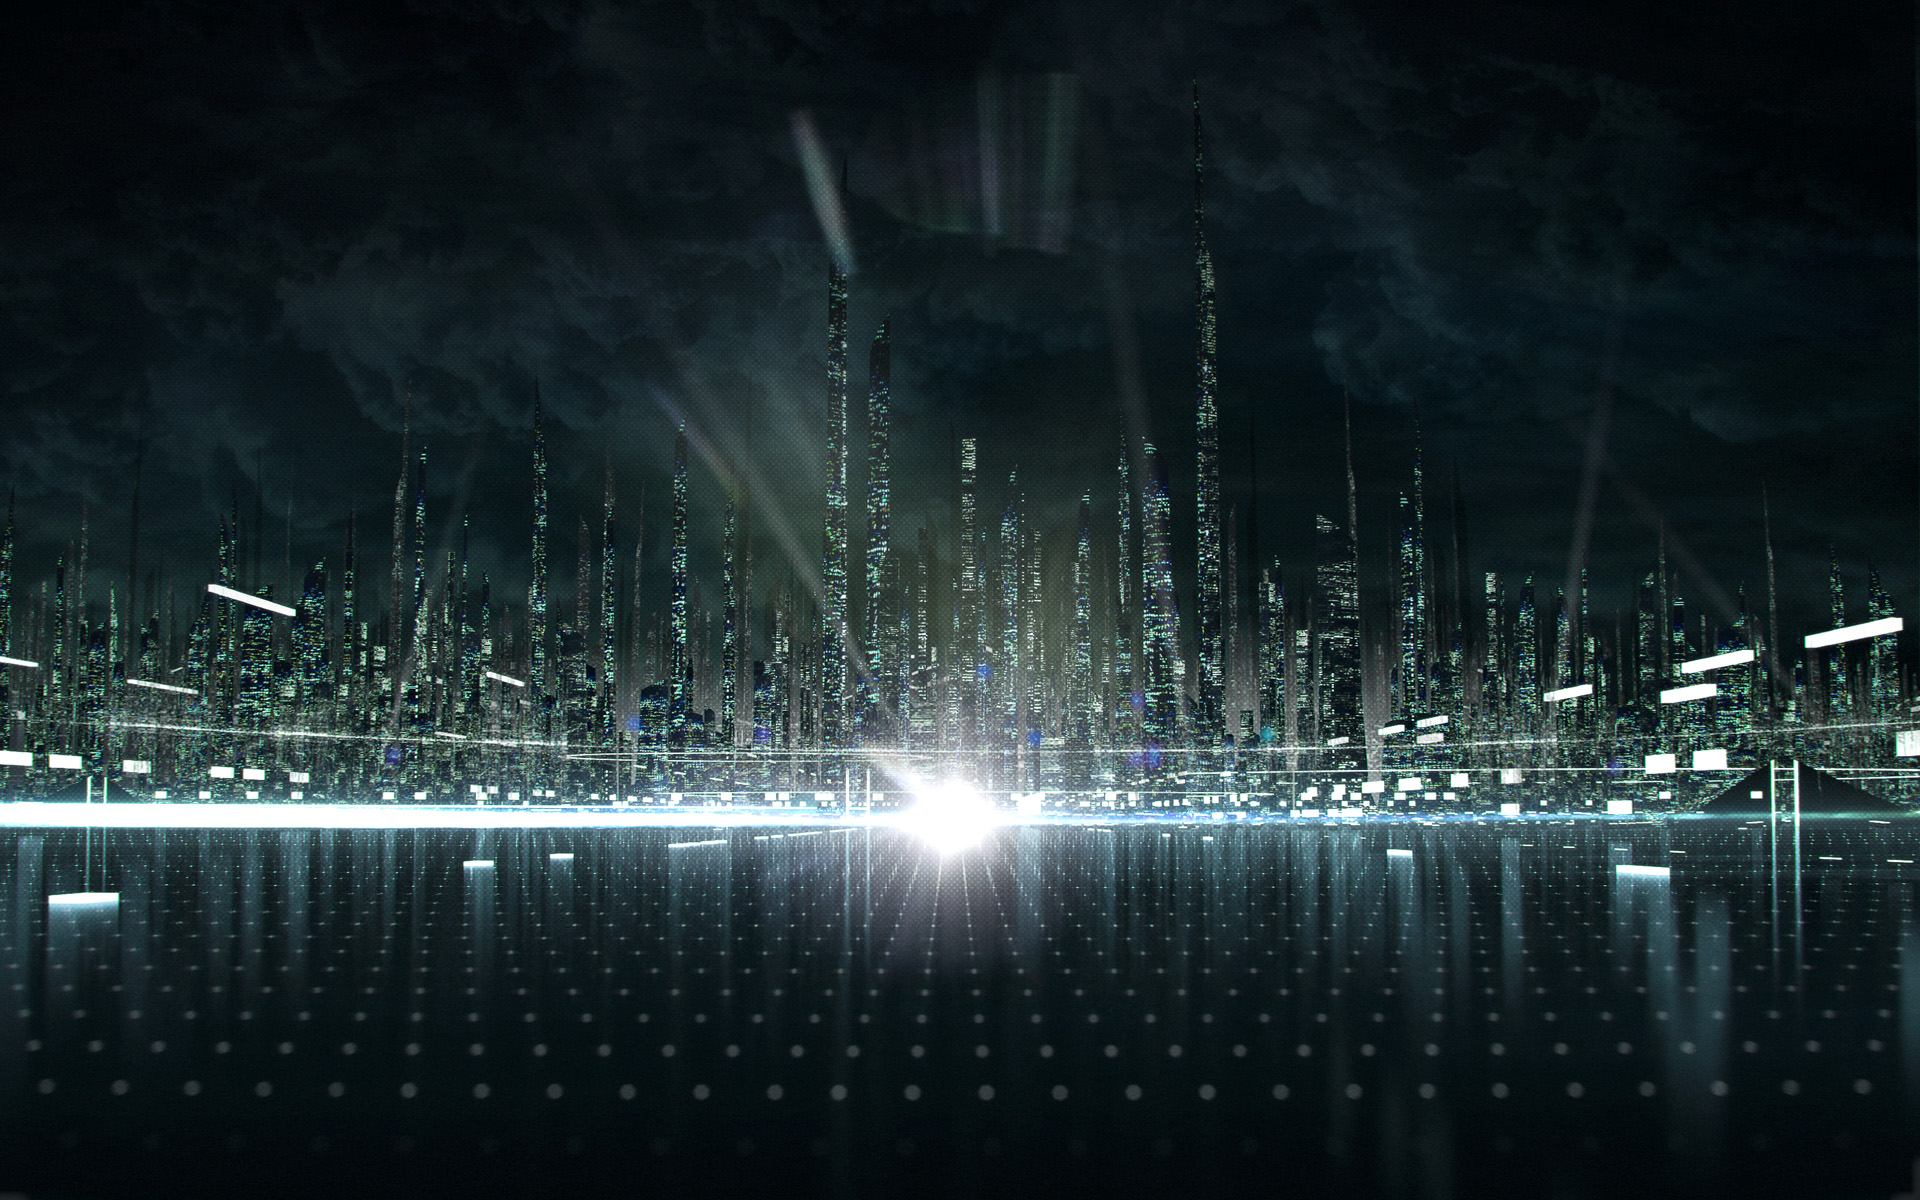 Tron City from Disneys Tron Legacy Movie wallpaper   Click picture 1920x1200